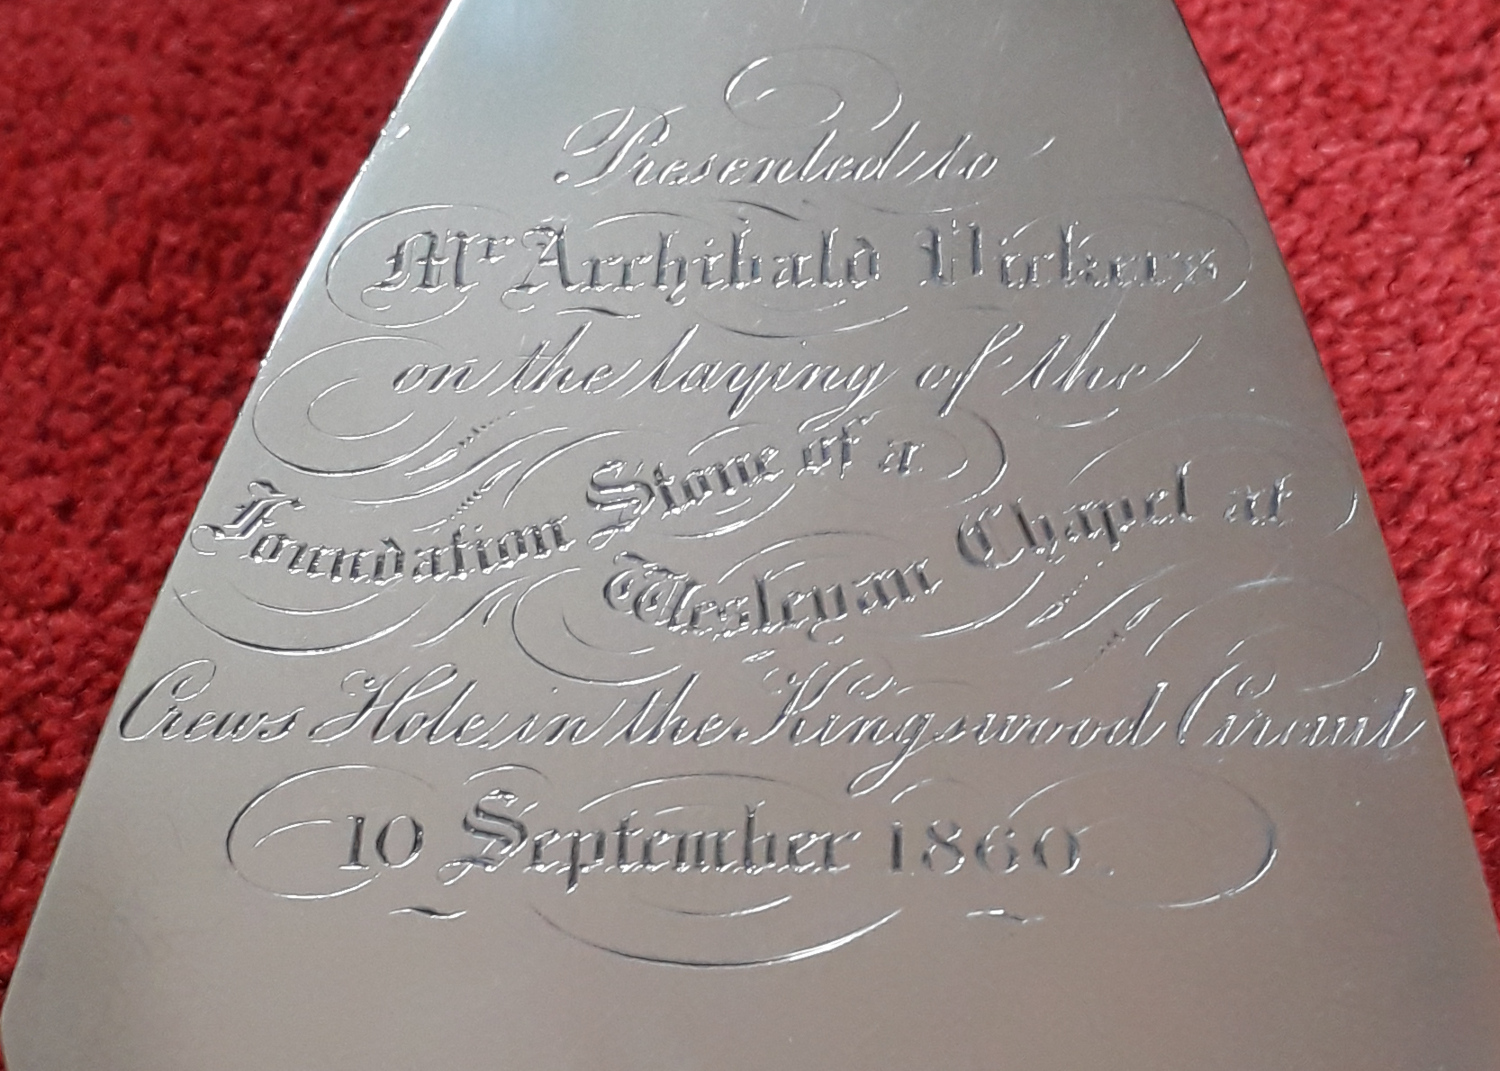 Inscription on Trowel presented to Archibald Vickers